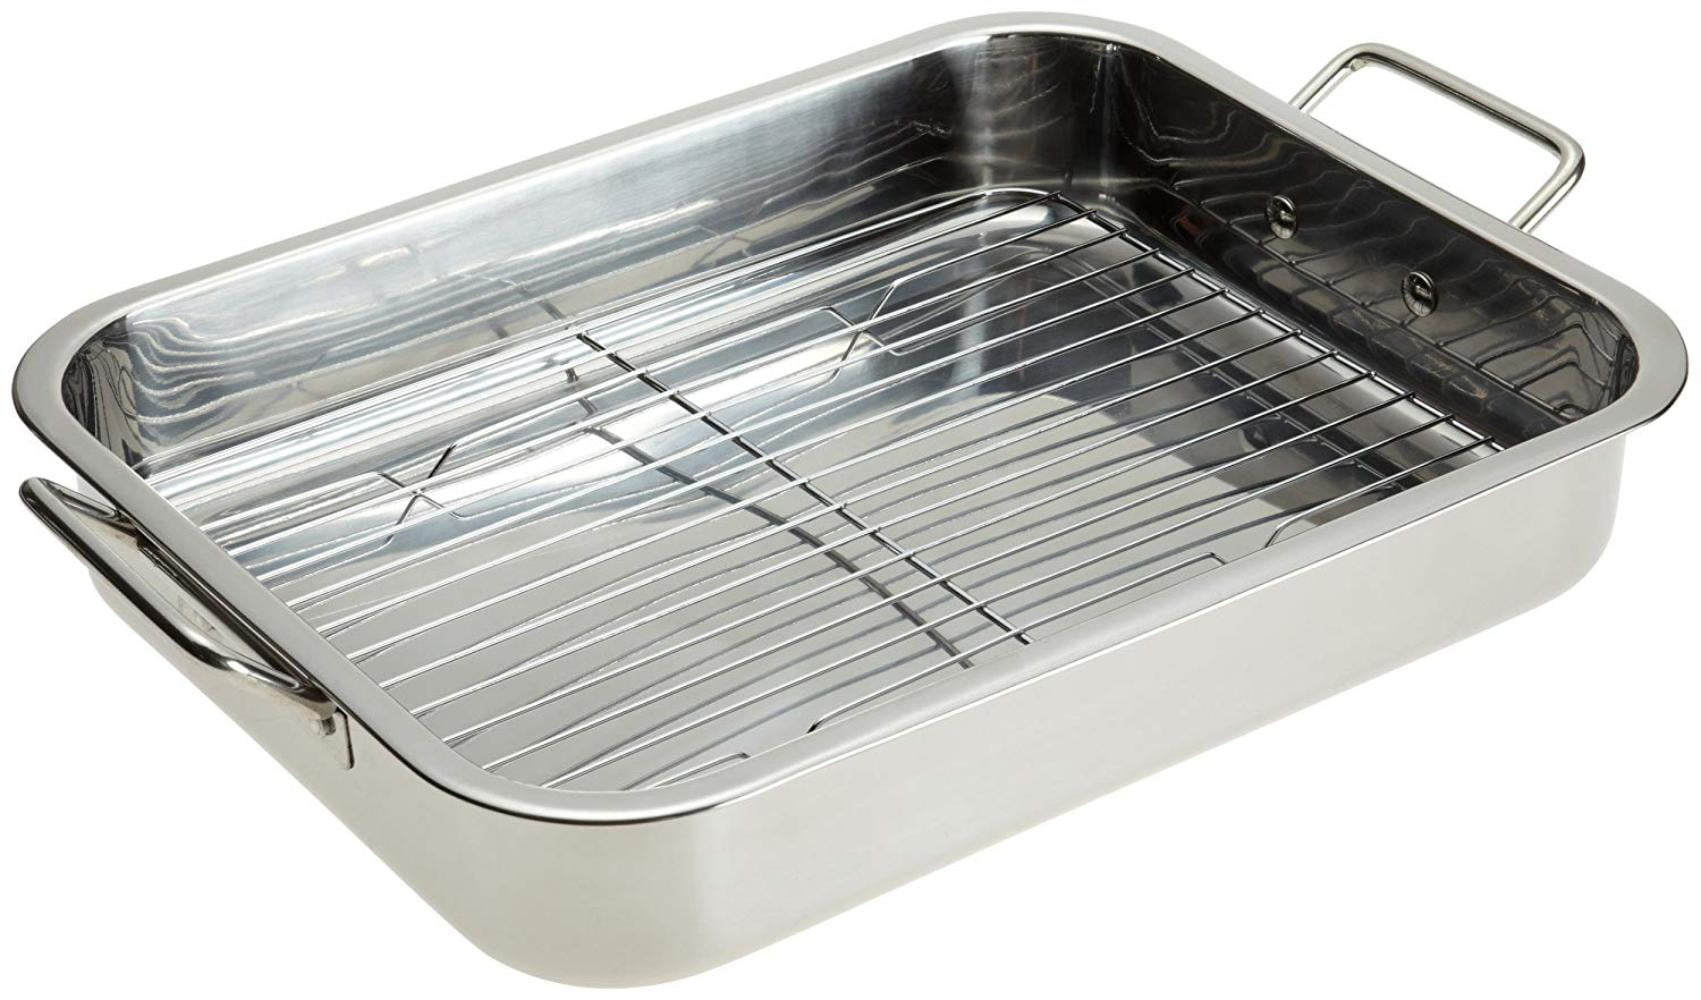 Cooks Stainless Steel Lasagna Pan With Roasting Rack 14.17"x10.35"x2.16" 